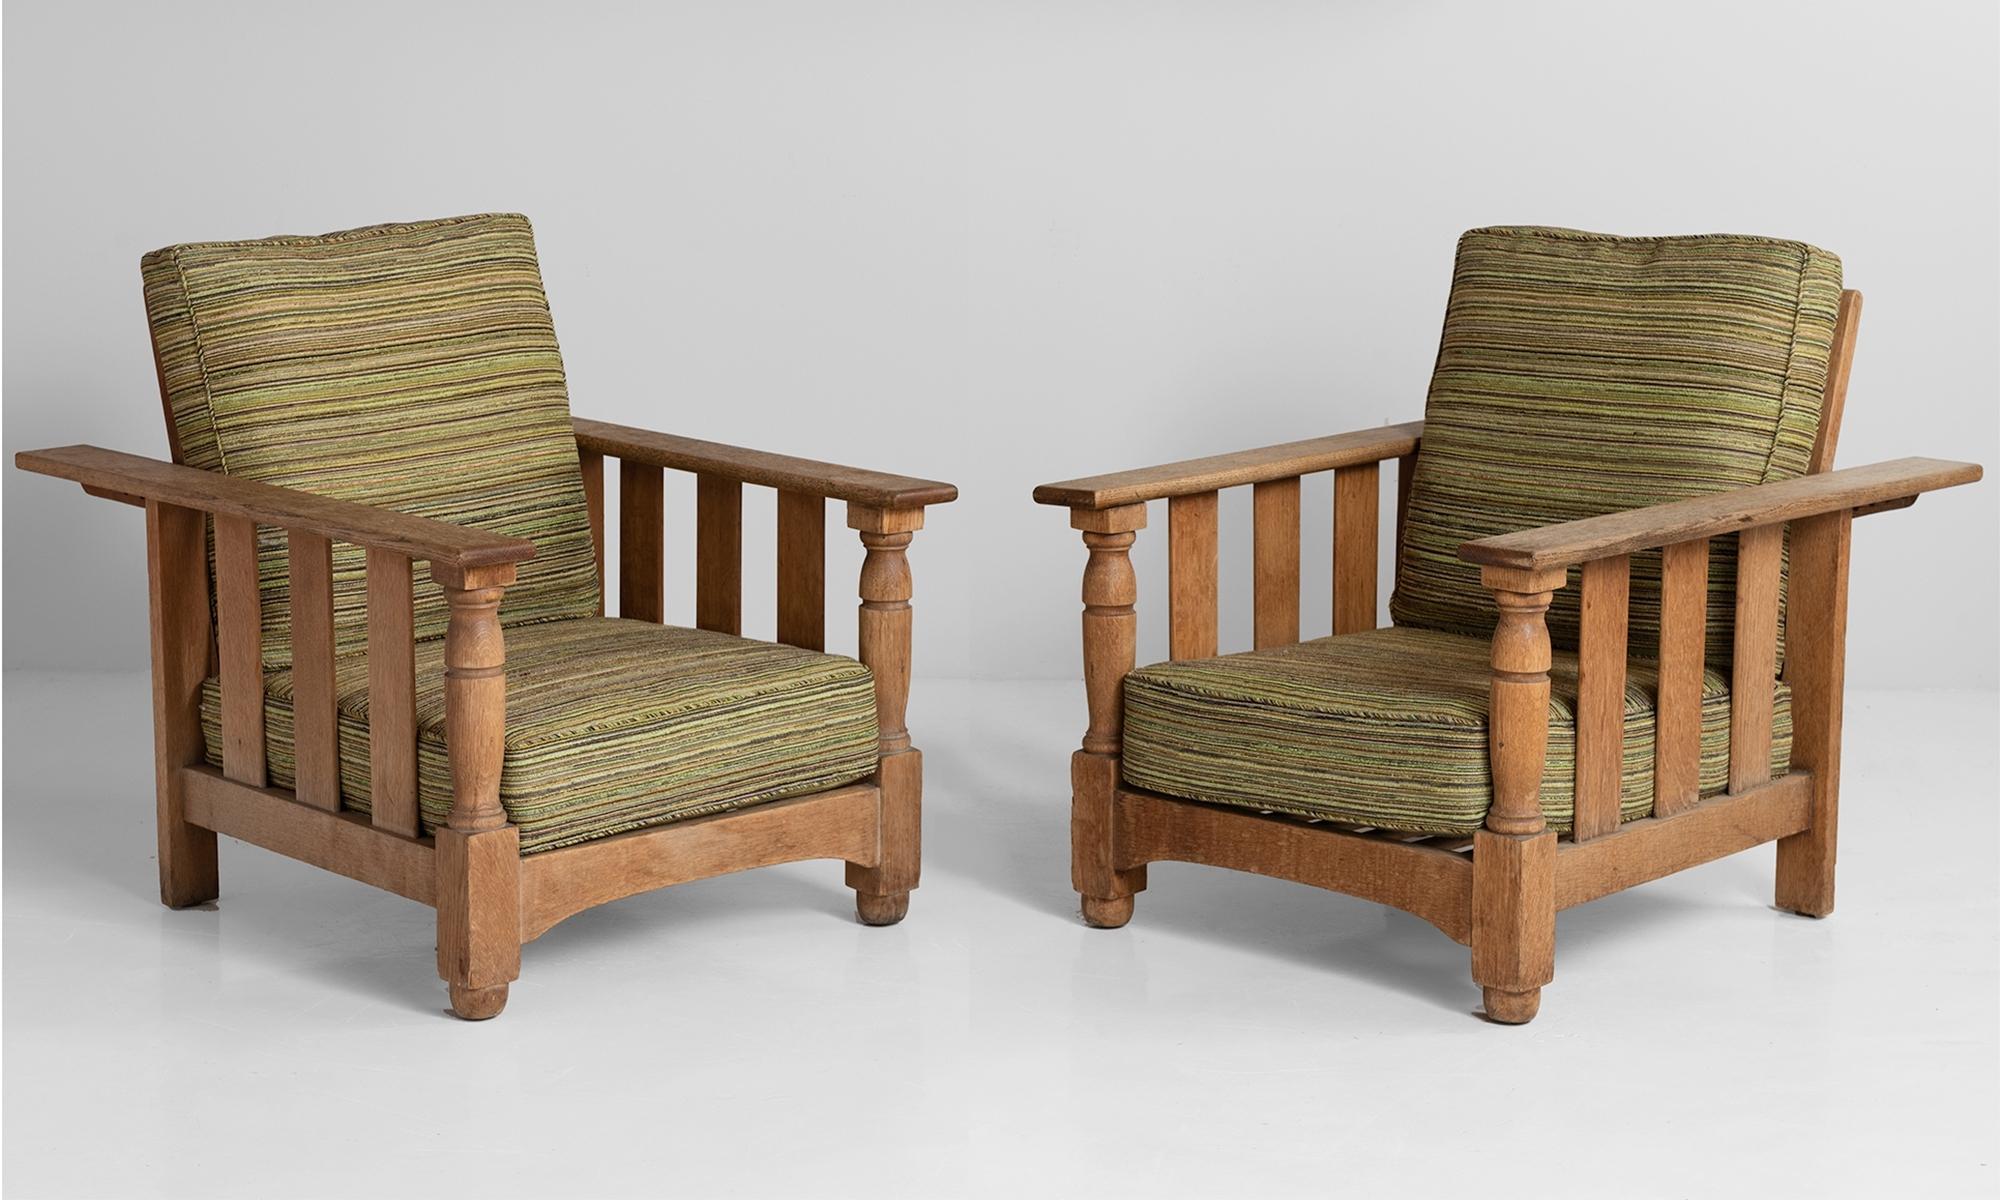 Edwarian Oak Reclining Armchairs, England, circa 1915.

Pair of newly upholstered armchairs with adjustable backs, produced by Heals of London.